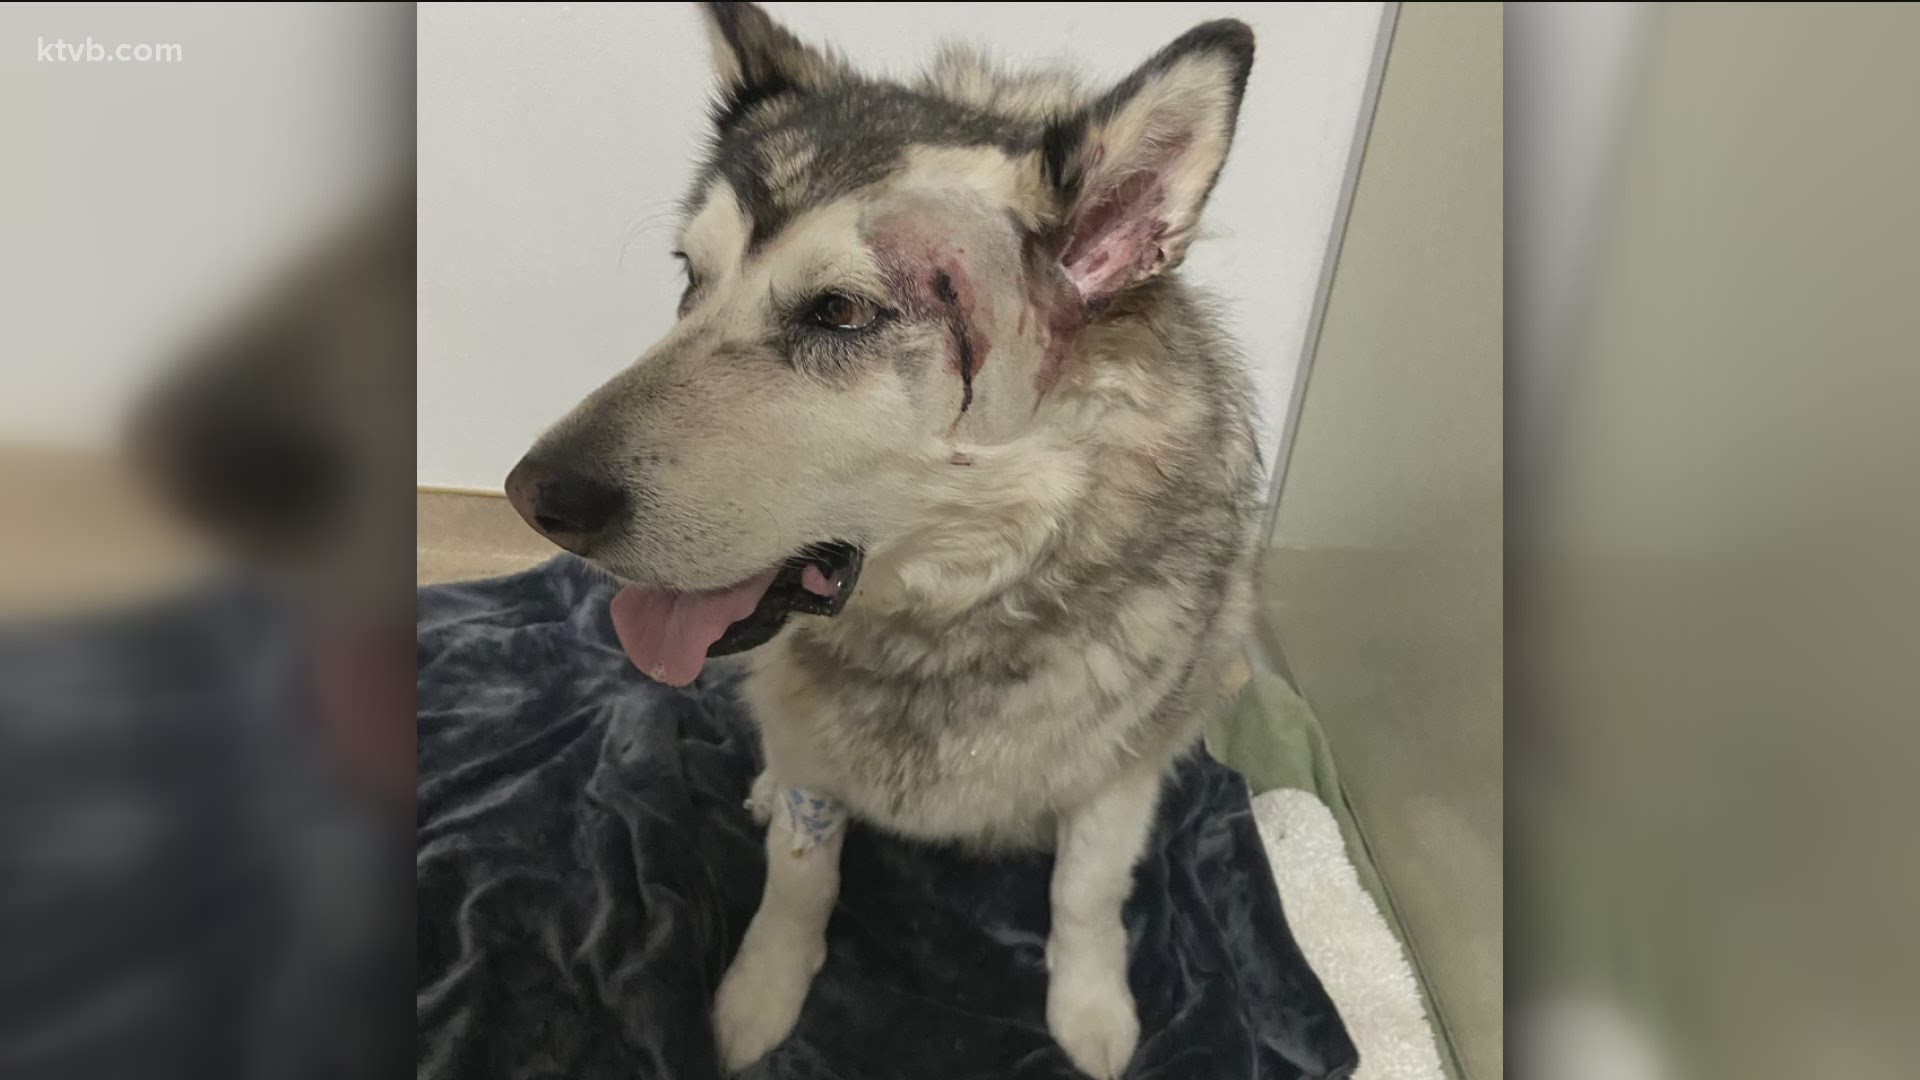 An Idaho family was backpacking in North Fork Lake when their dog was mistaken for a wolf and shot twice.